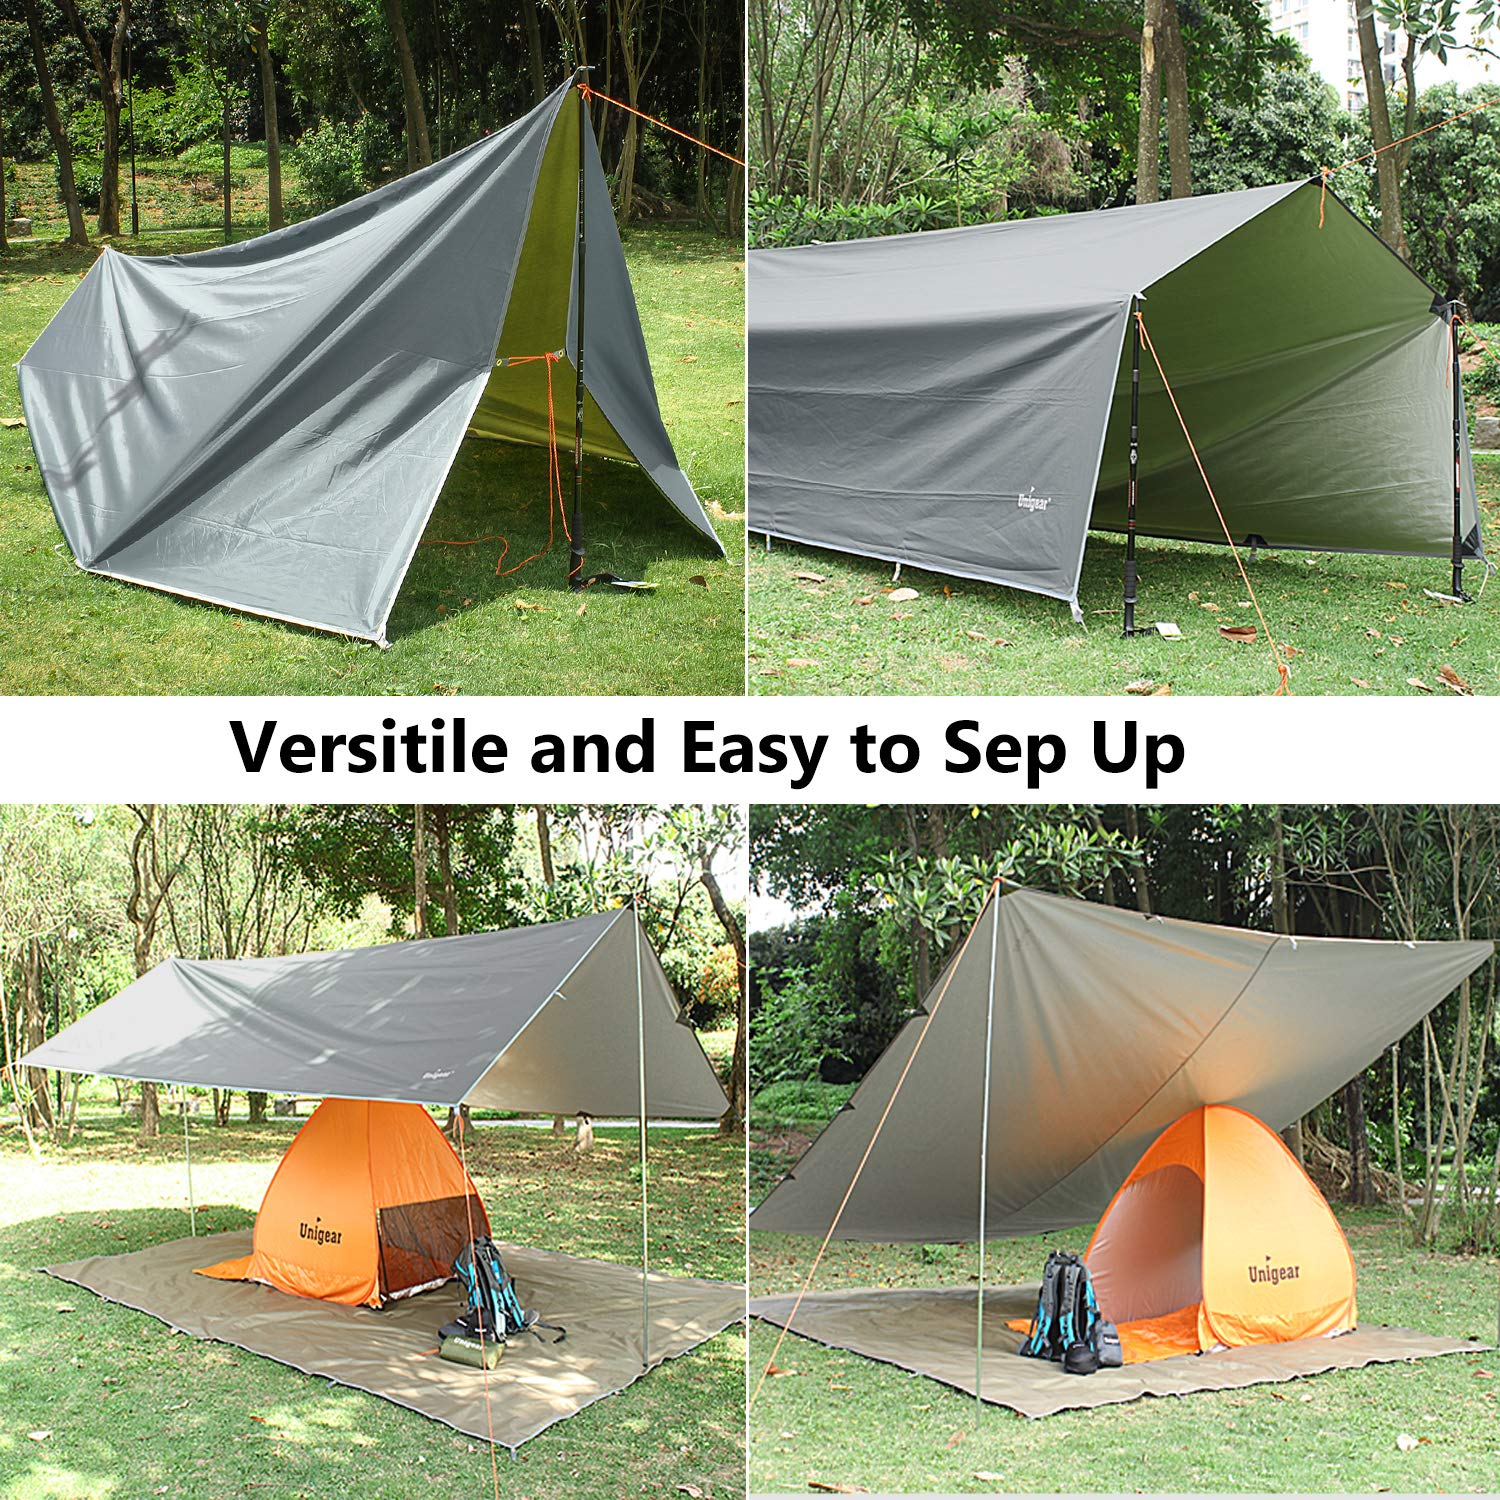 Waterproof Tent Tarp Sunshade Canopy, UV Protection and PU 3000mm Waterproof, Lightweight for Camping